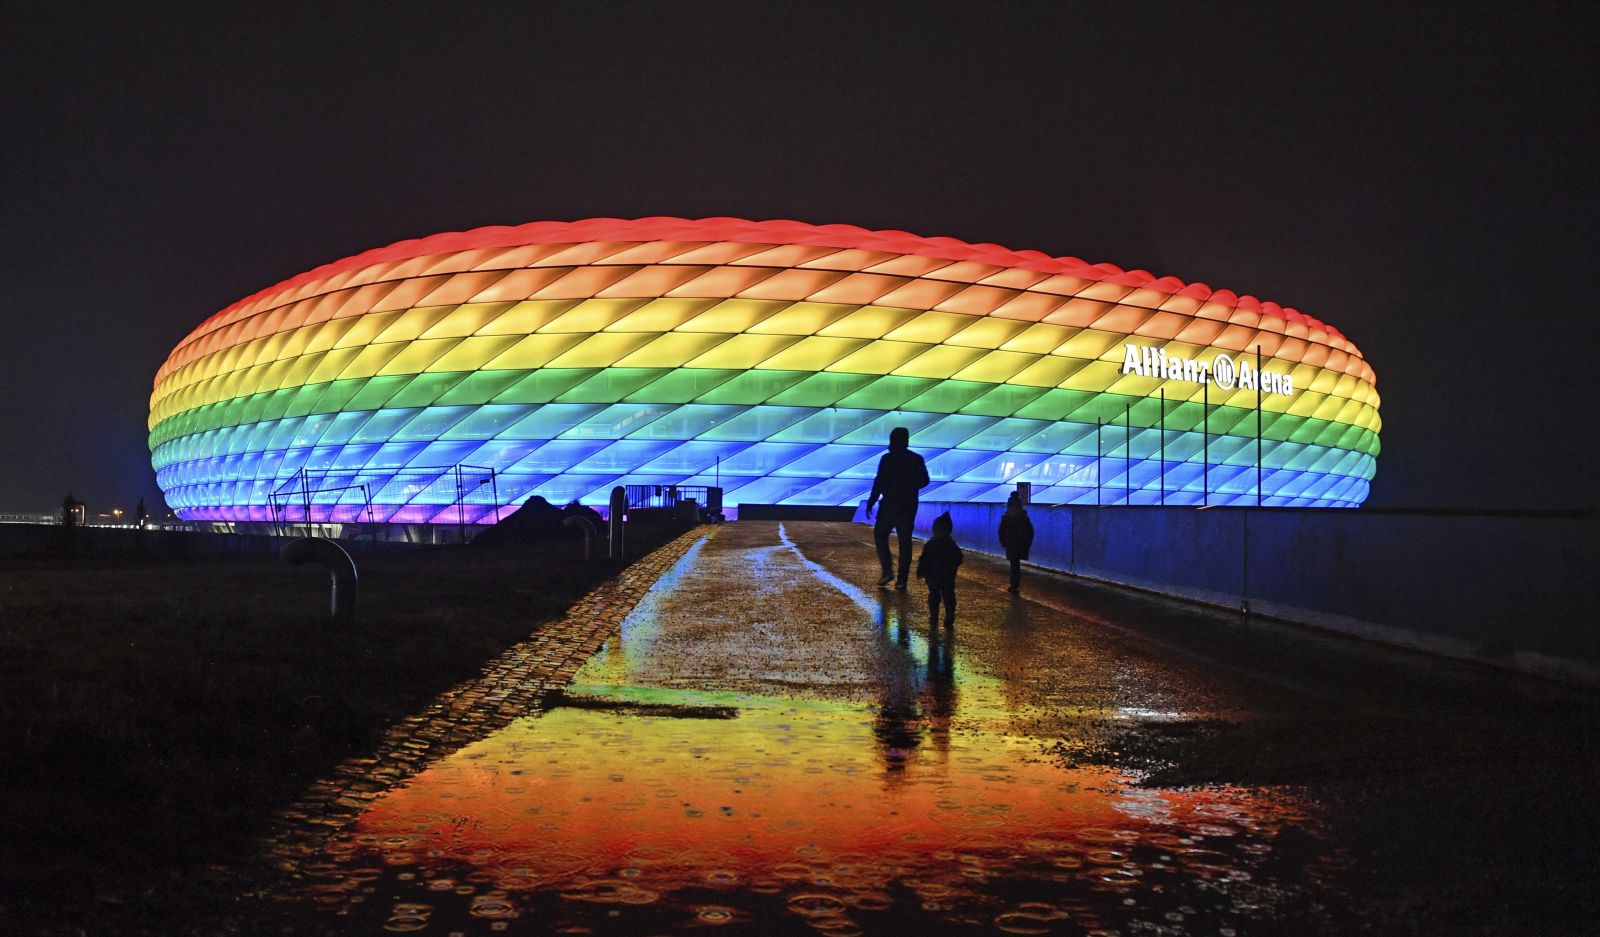 firo: 30.01.2021 football, 1. Bundesliga, season 2020/2021, FC Bayern Munich Muenchen - TSG Hoffenheim 4: 1 Allianz Arena, stadium, of, FC Bayern Munich, lights, in, the, rainbow colors as, sign, for, Tolerance, and, versus, discrimination, depositor, rainbow Photo by: Frank Hoerman/picture-alliance/dpa/AP Images